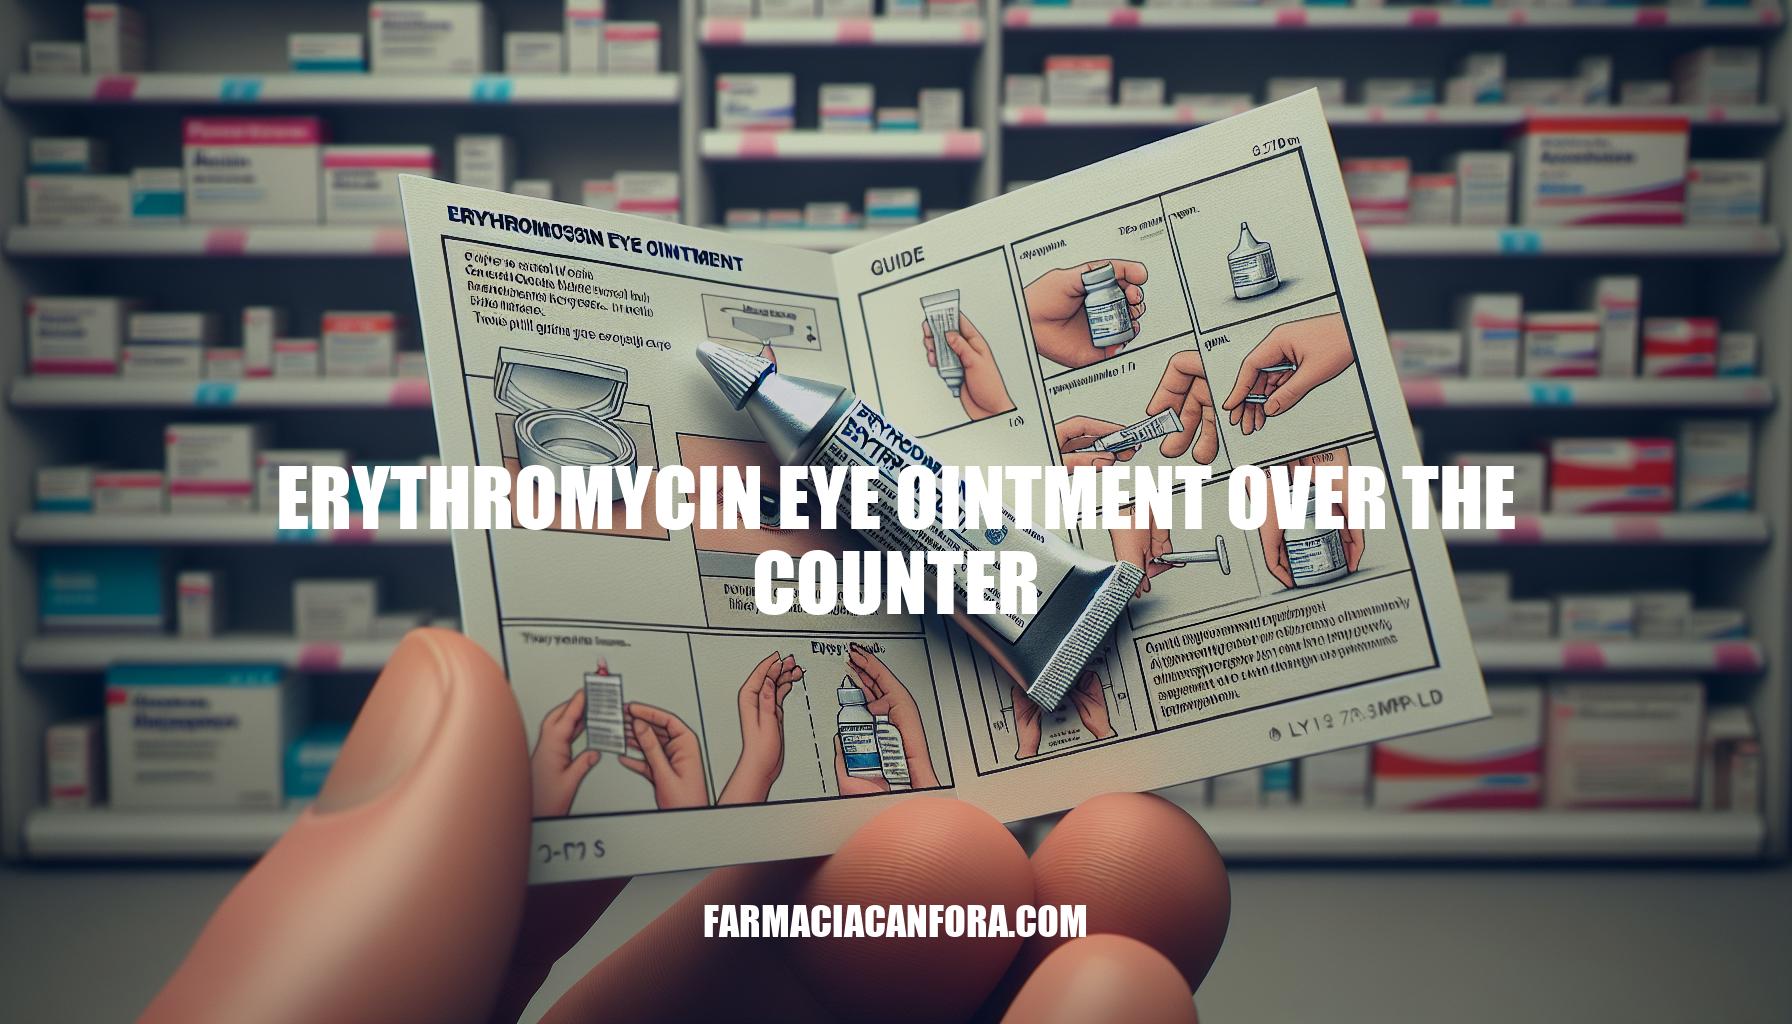 Erythromycin Eye Ointment Over the Counter: A Guide